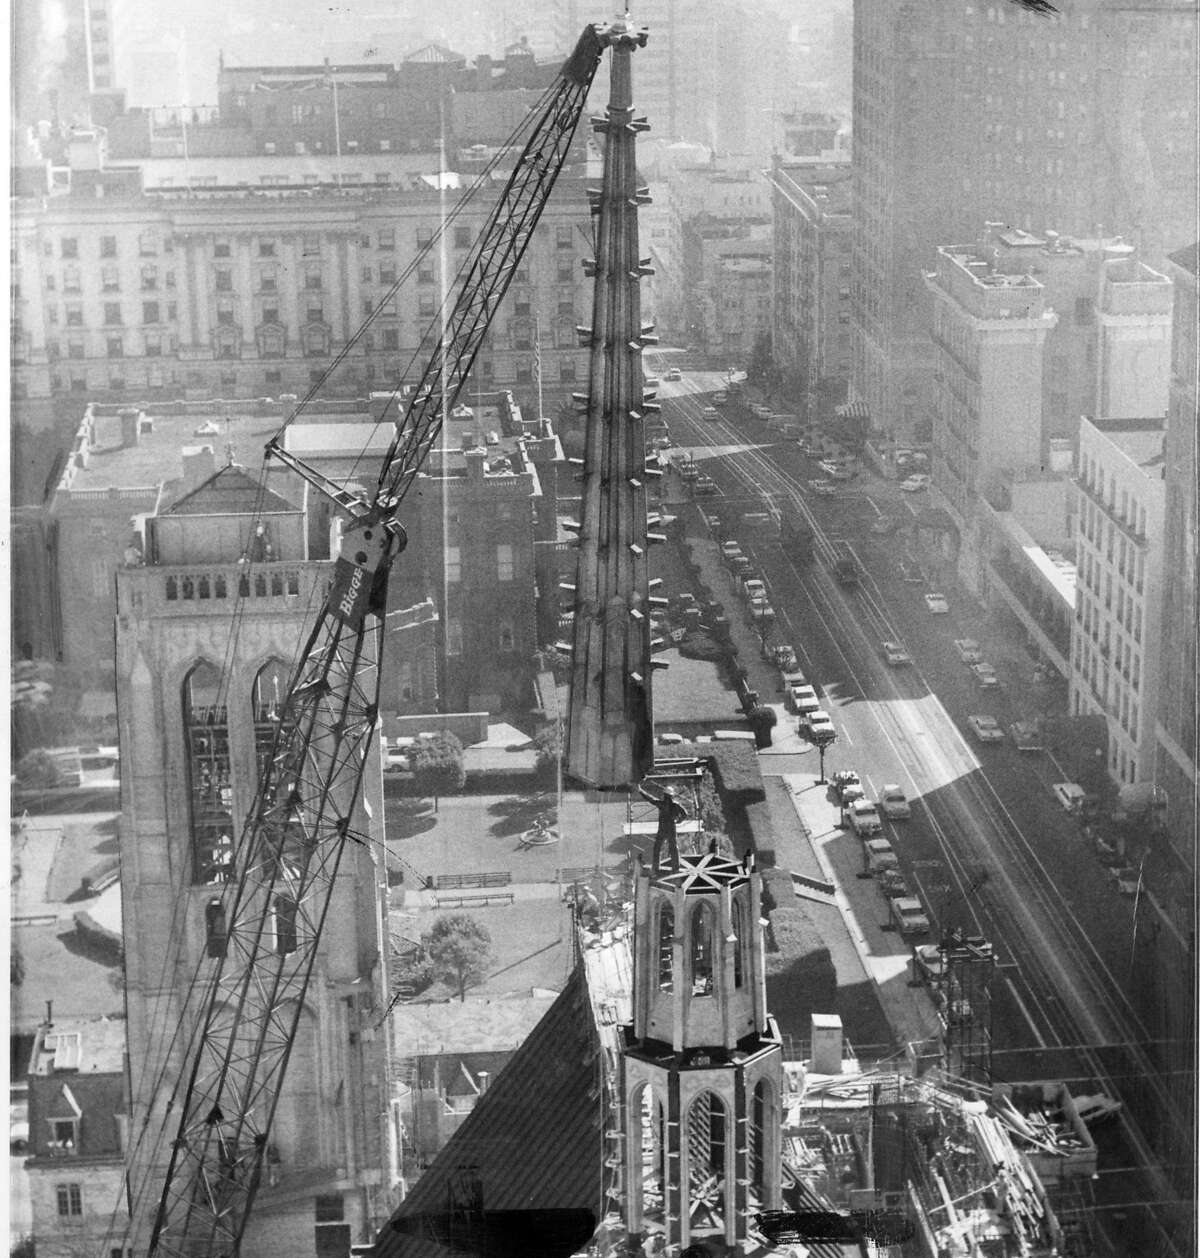 The new spire is being lifted onto Grace Cathedral, March 19, 1963 The spire weighs apron. 5 tons, and is surmounted by a gold cross that measures 17 ft. 5 inches in height Photo ran 3/20/1963, p. 1 Associated Press photo